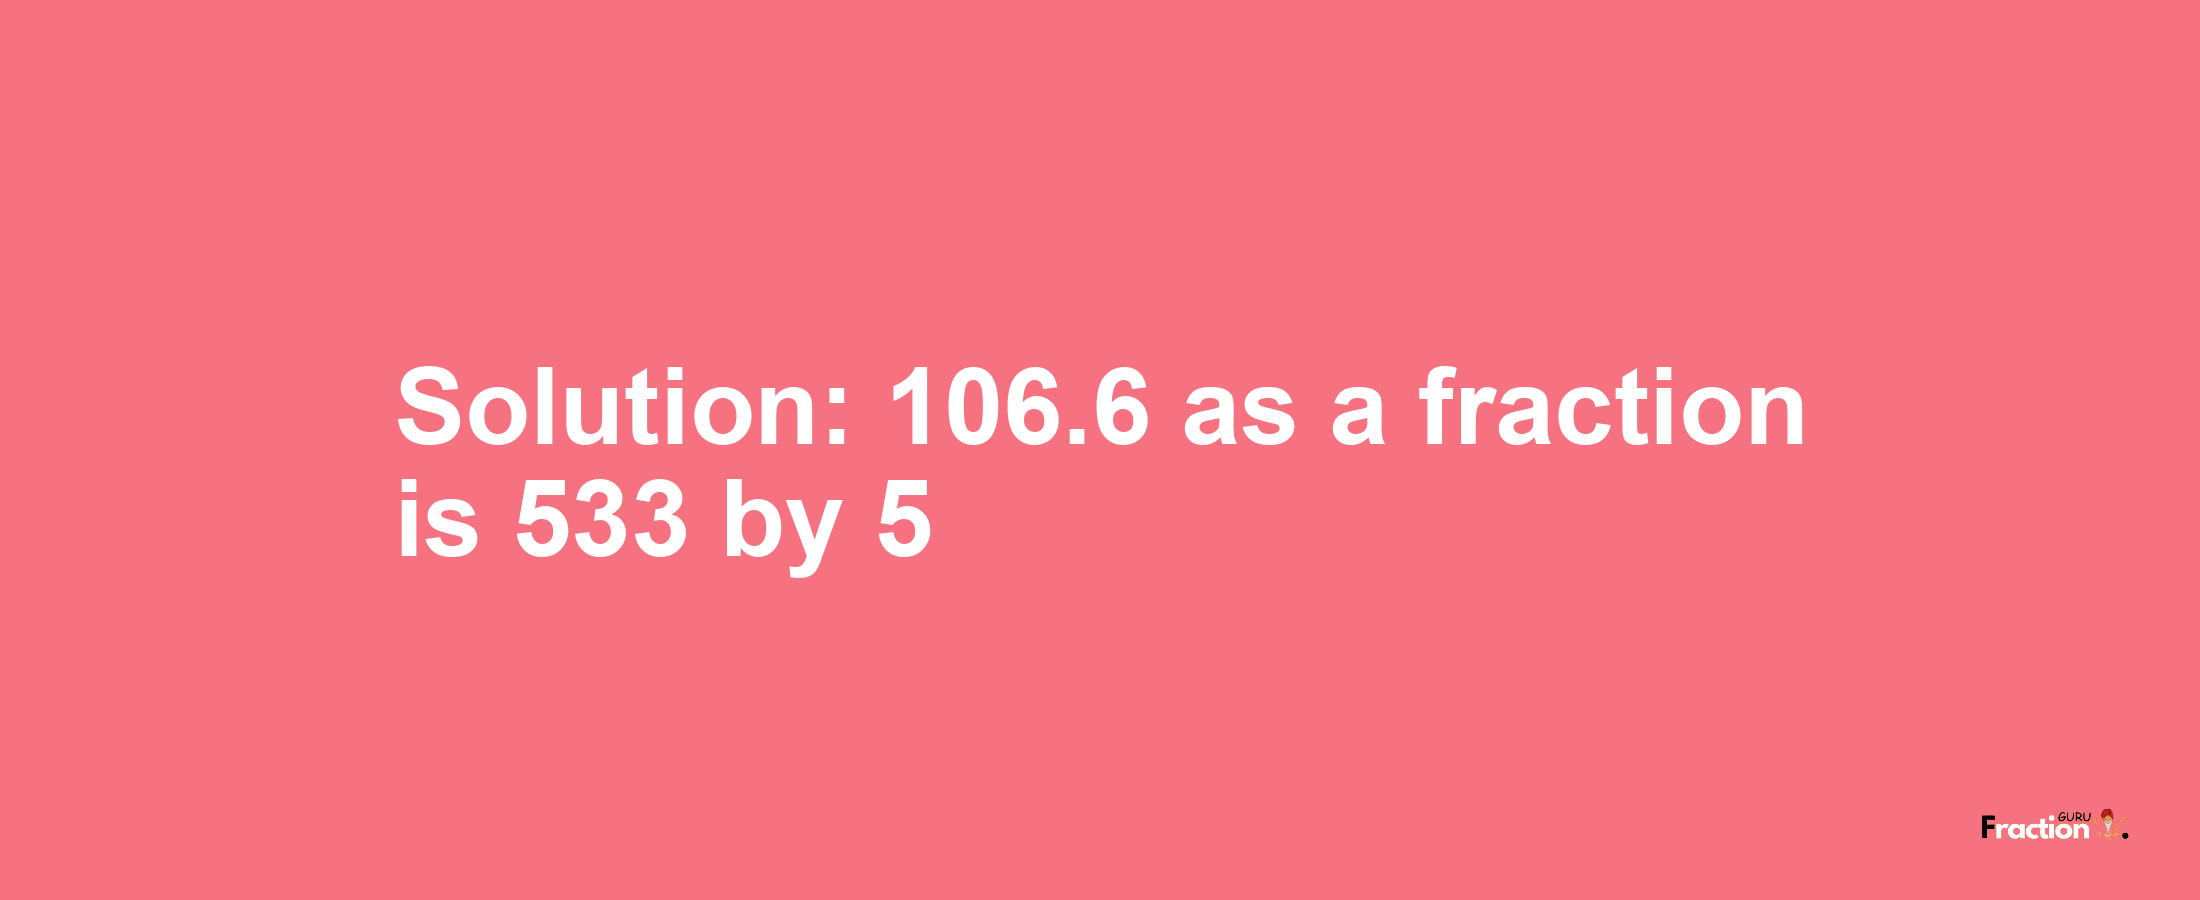 Solution:106.6 as a fraction is 533/5